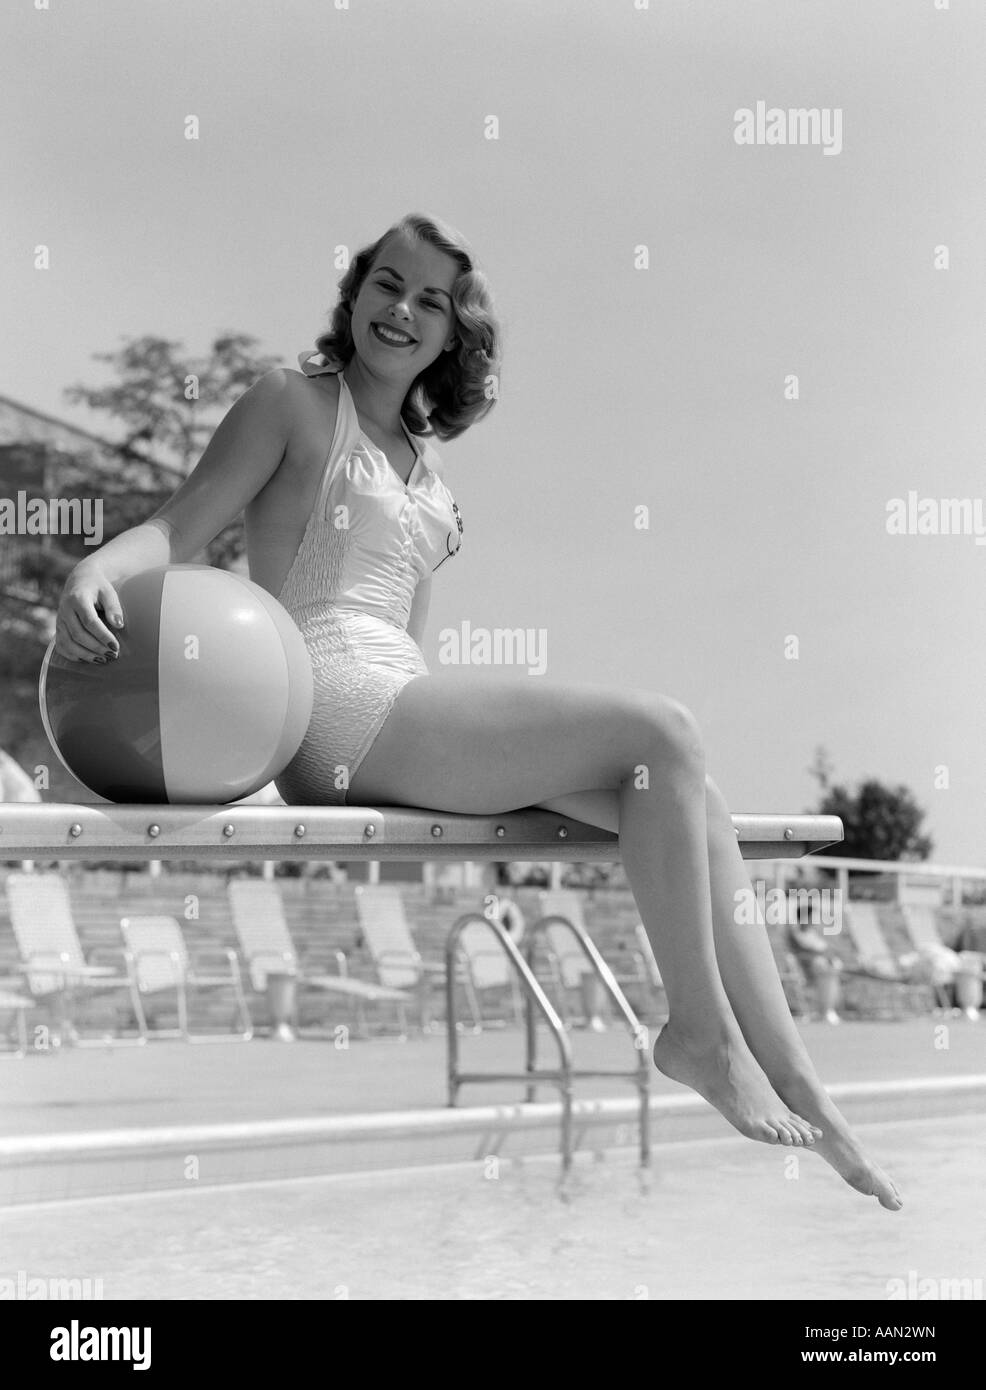 Bathing suit 1960's Black and White Stock Photos & Images - Alamy